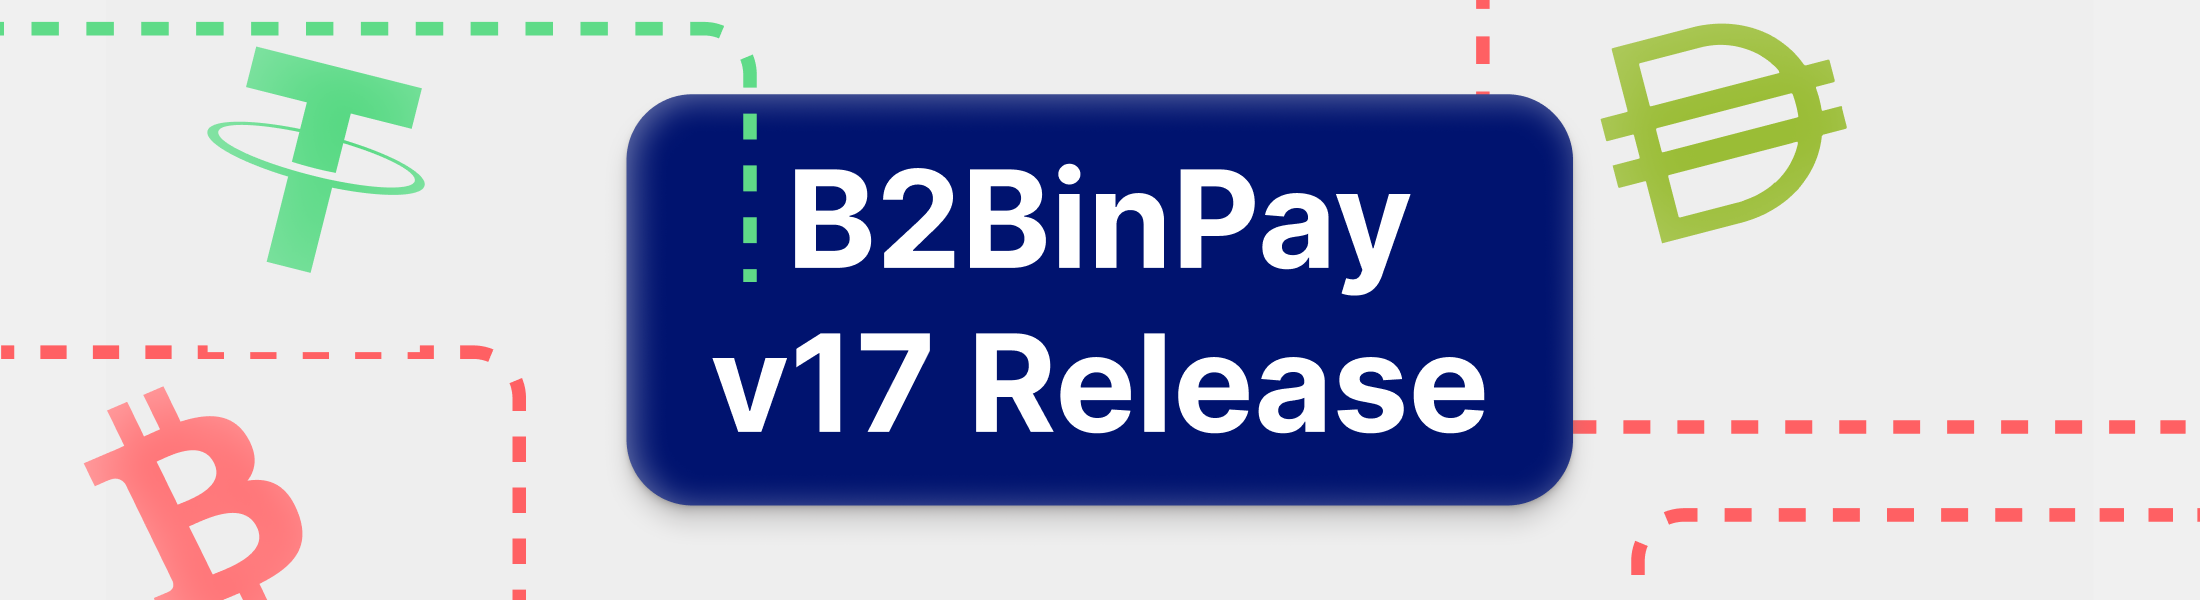 Geek insider, geekinsider, geekinsider. Com,, unveiling the future of crypto payments with b2binpay v17, business